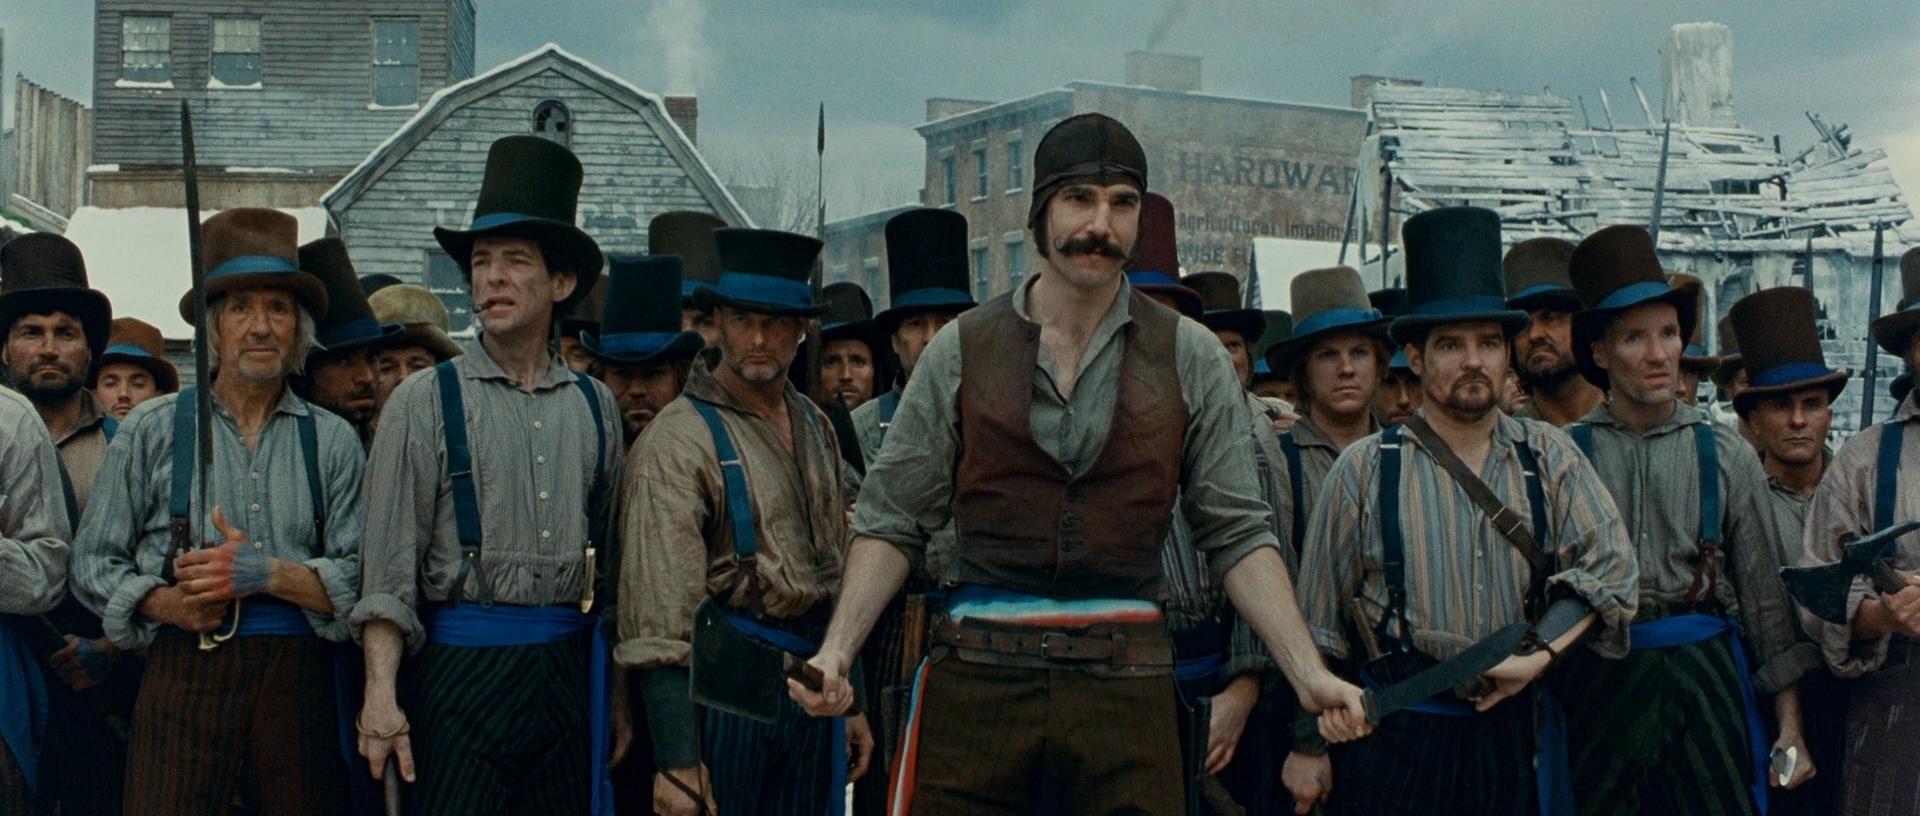 Gangs Of New York wallpaper, Movie, HQ Gangs Of New York picture